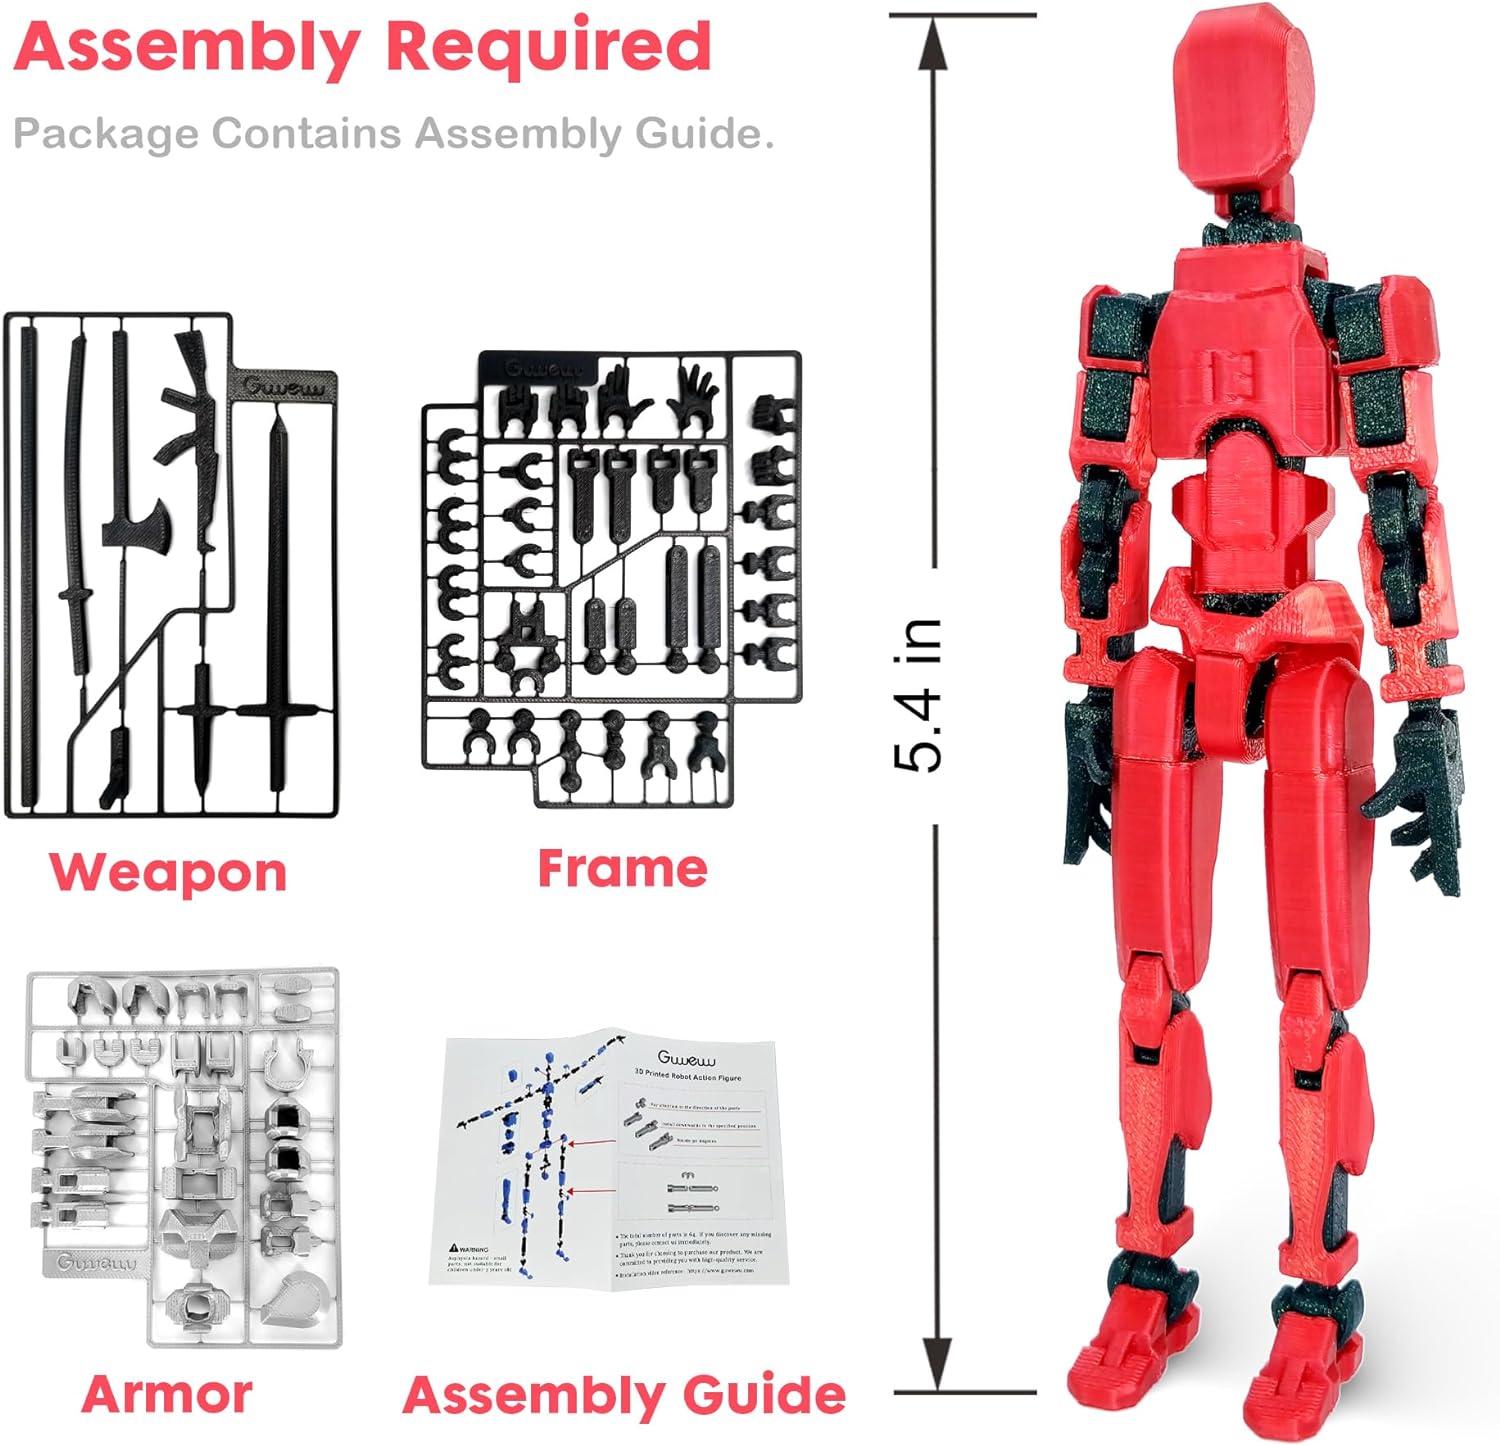 3D Printed Action Figure, Robot Toys with Full Articulation for Stop Motion Animation(2 pcs, Blue Red) Cykapu